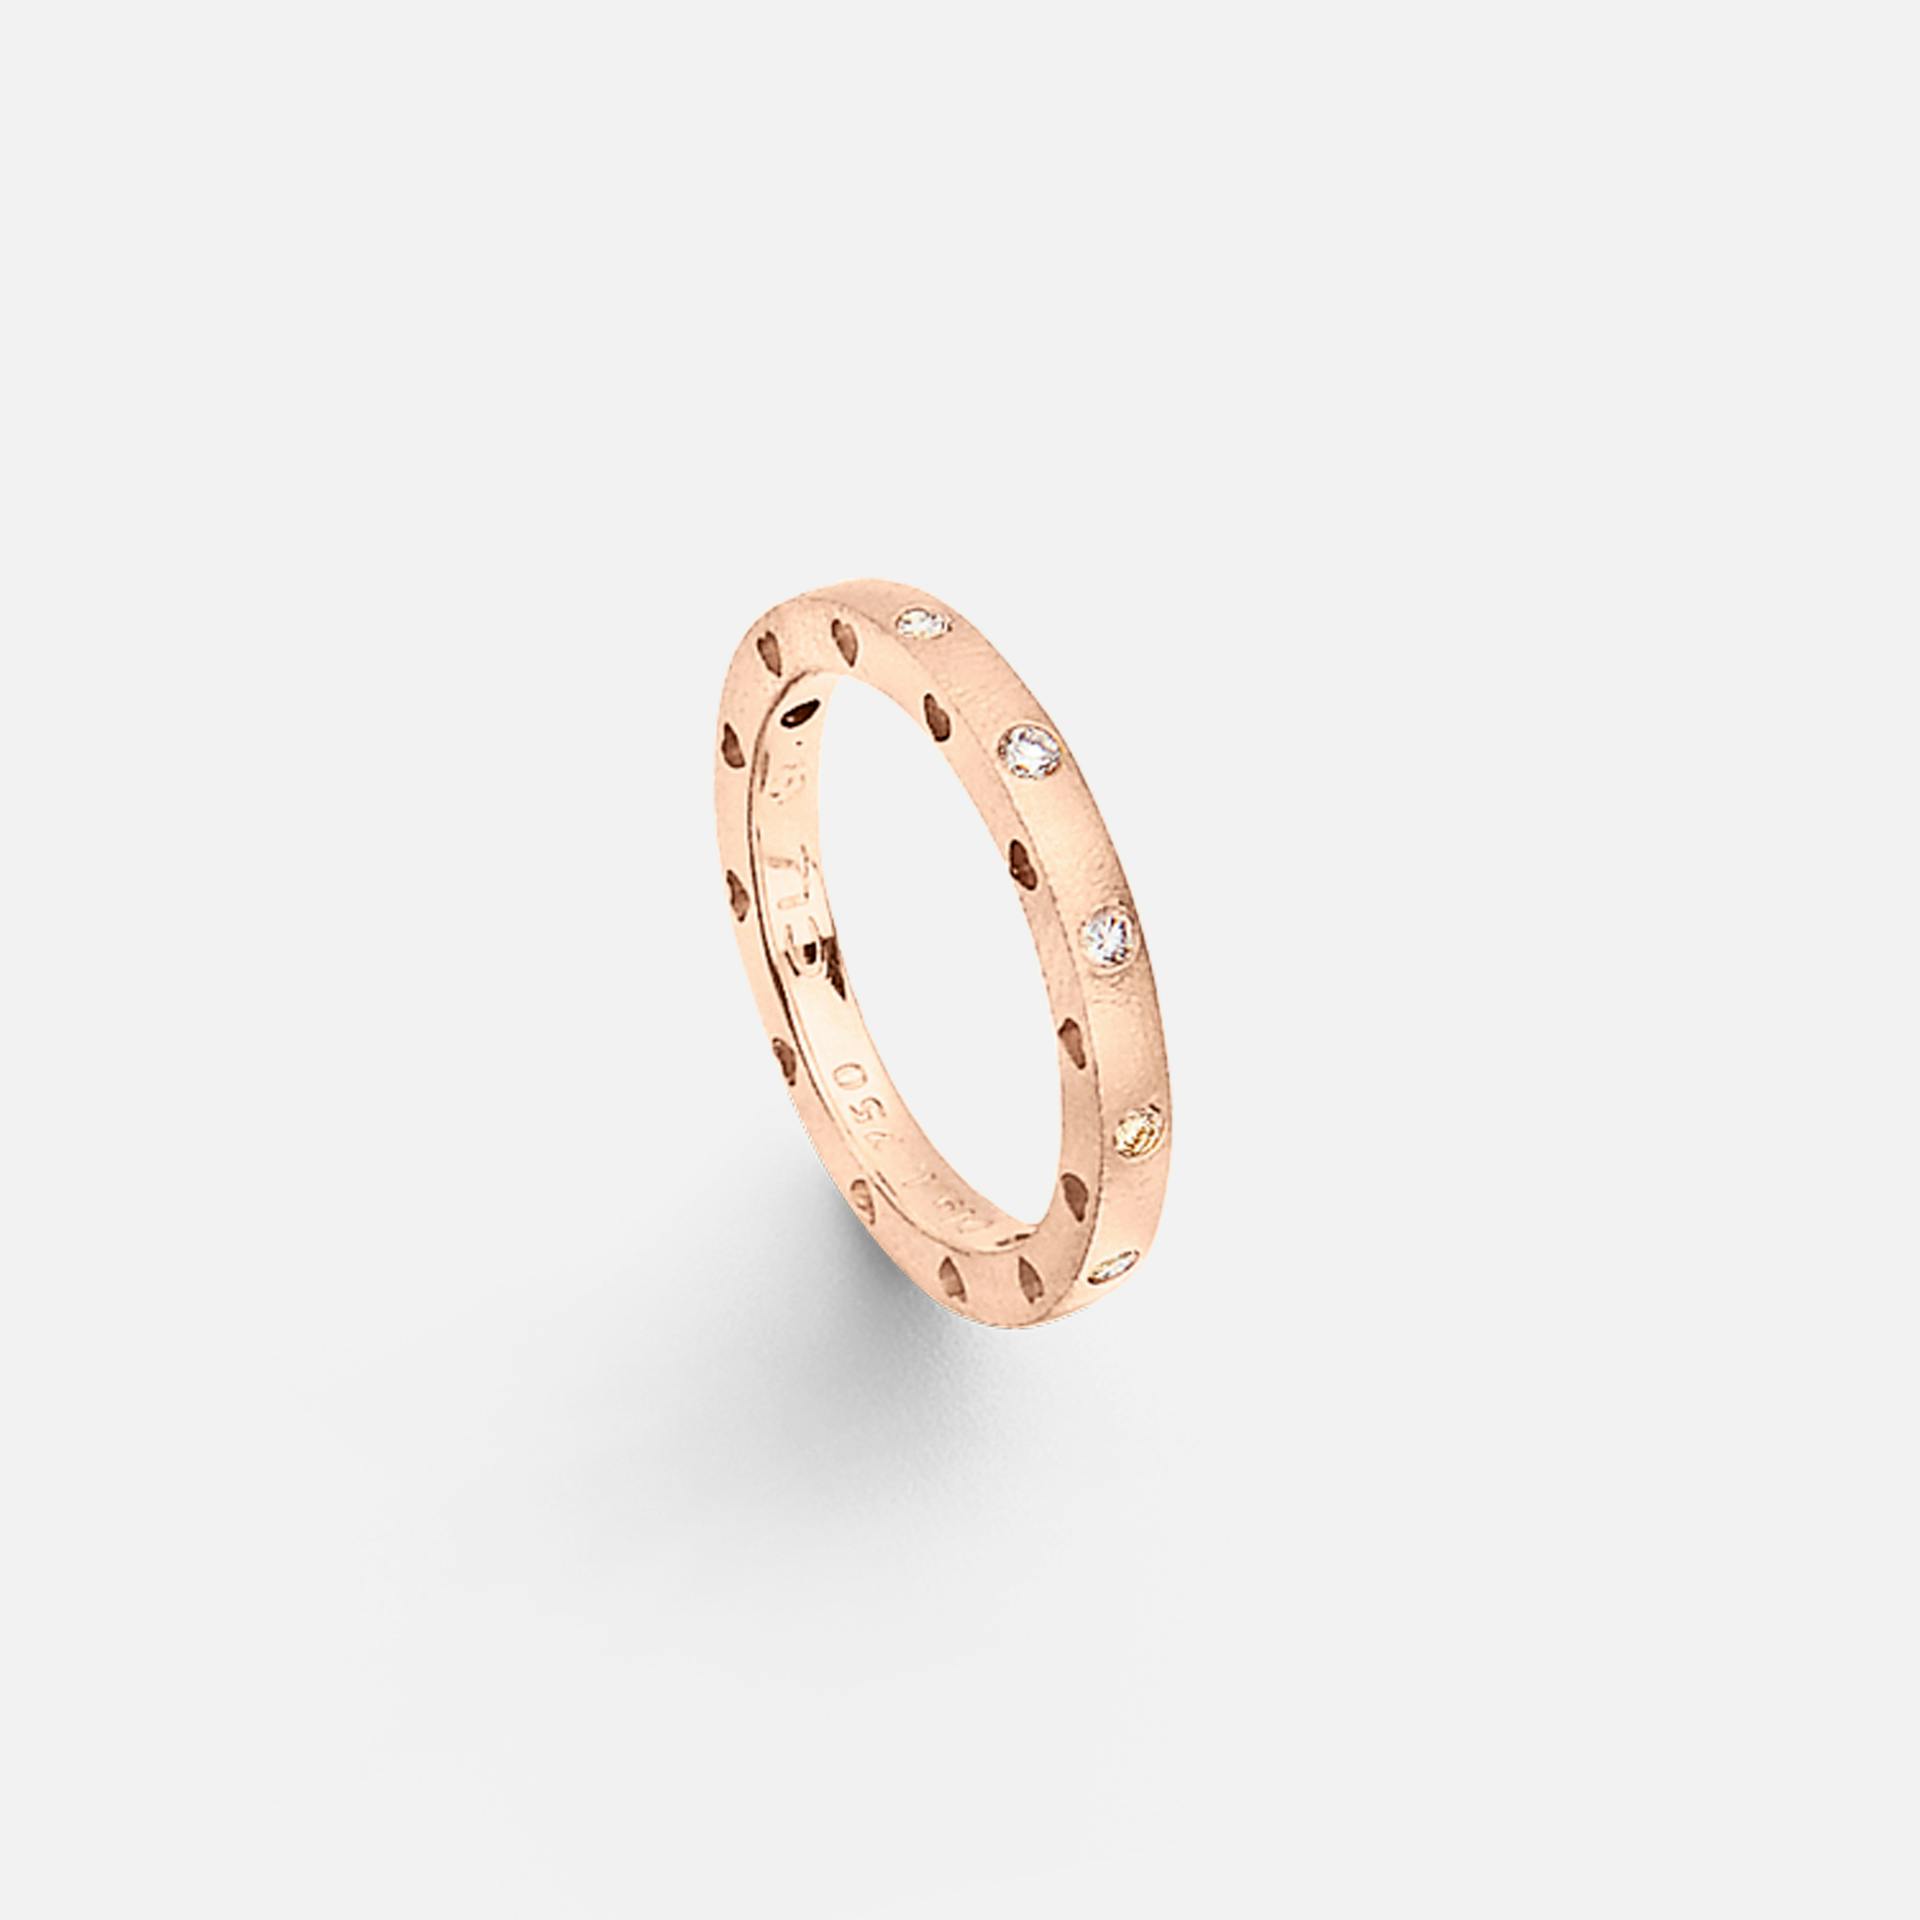 Forever Love ring 18k textured rose gold with diamonds 0.16 ct. TW. VS.